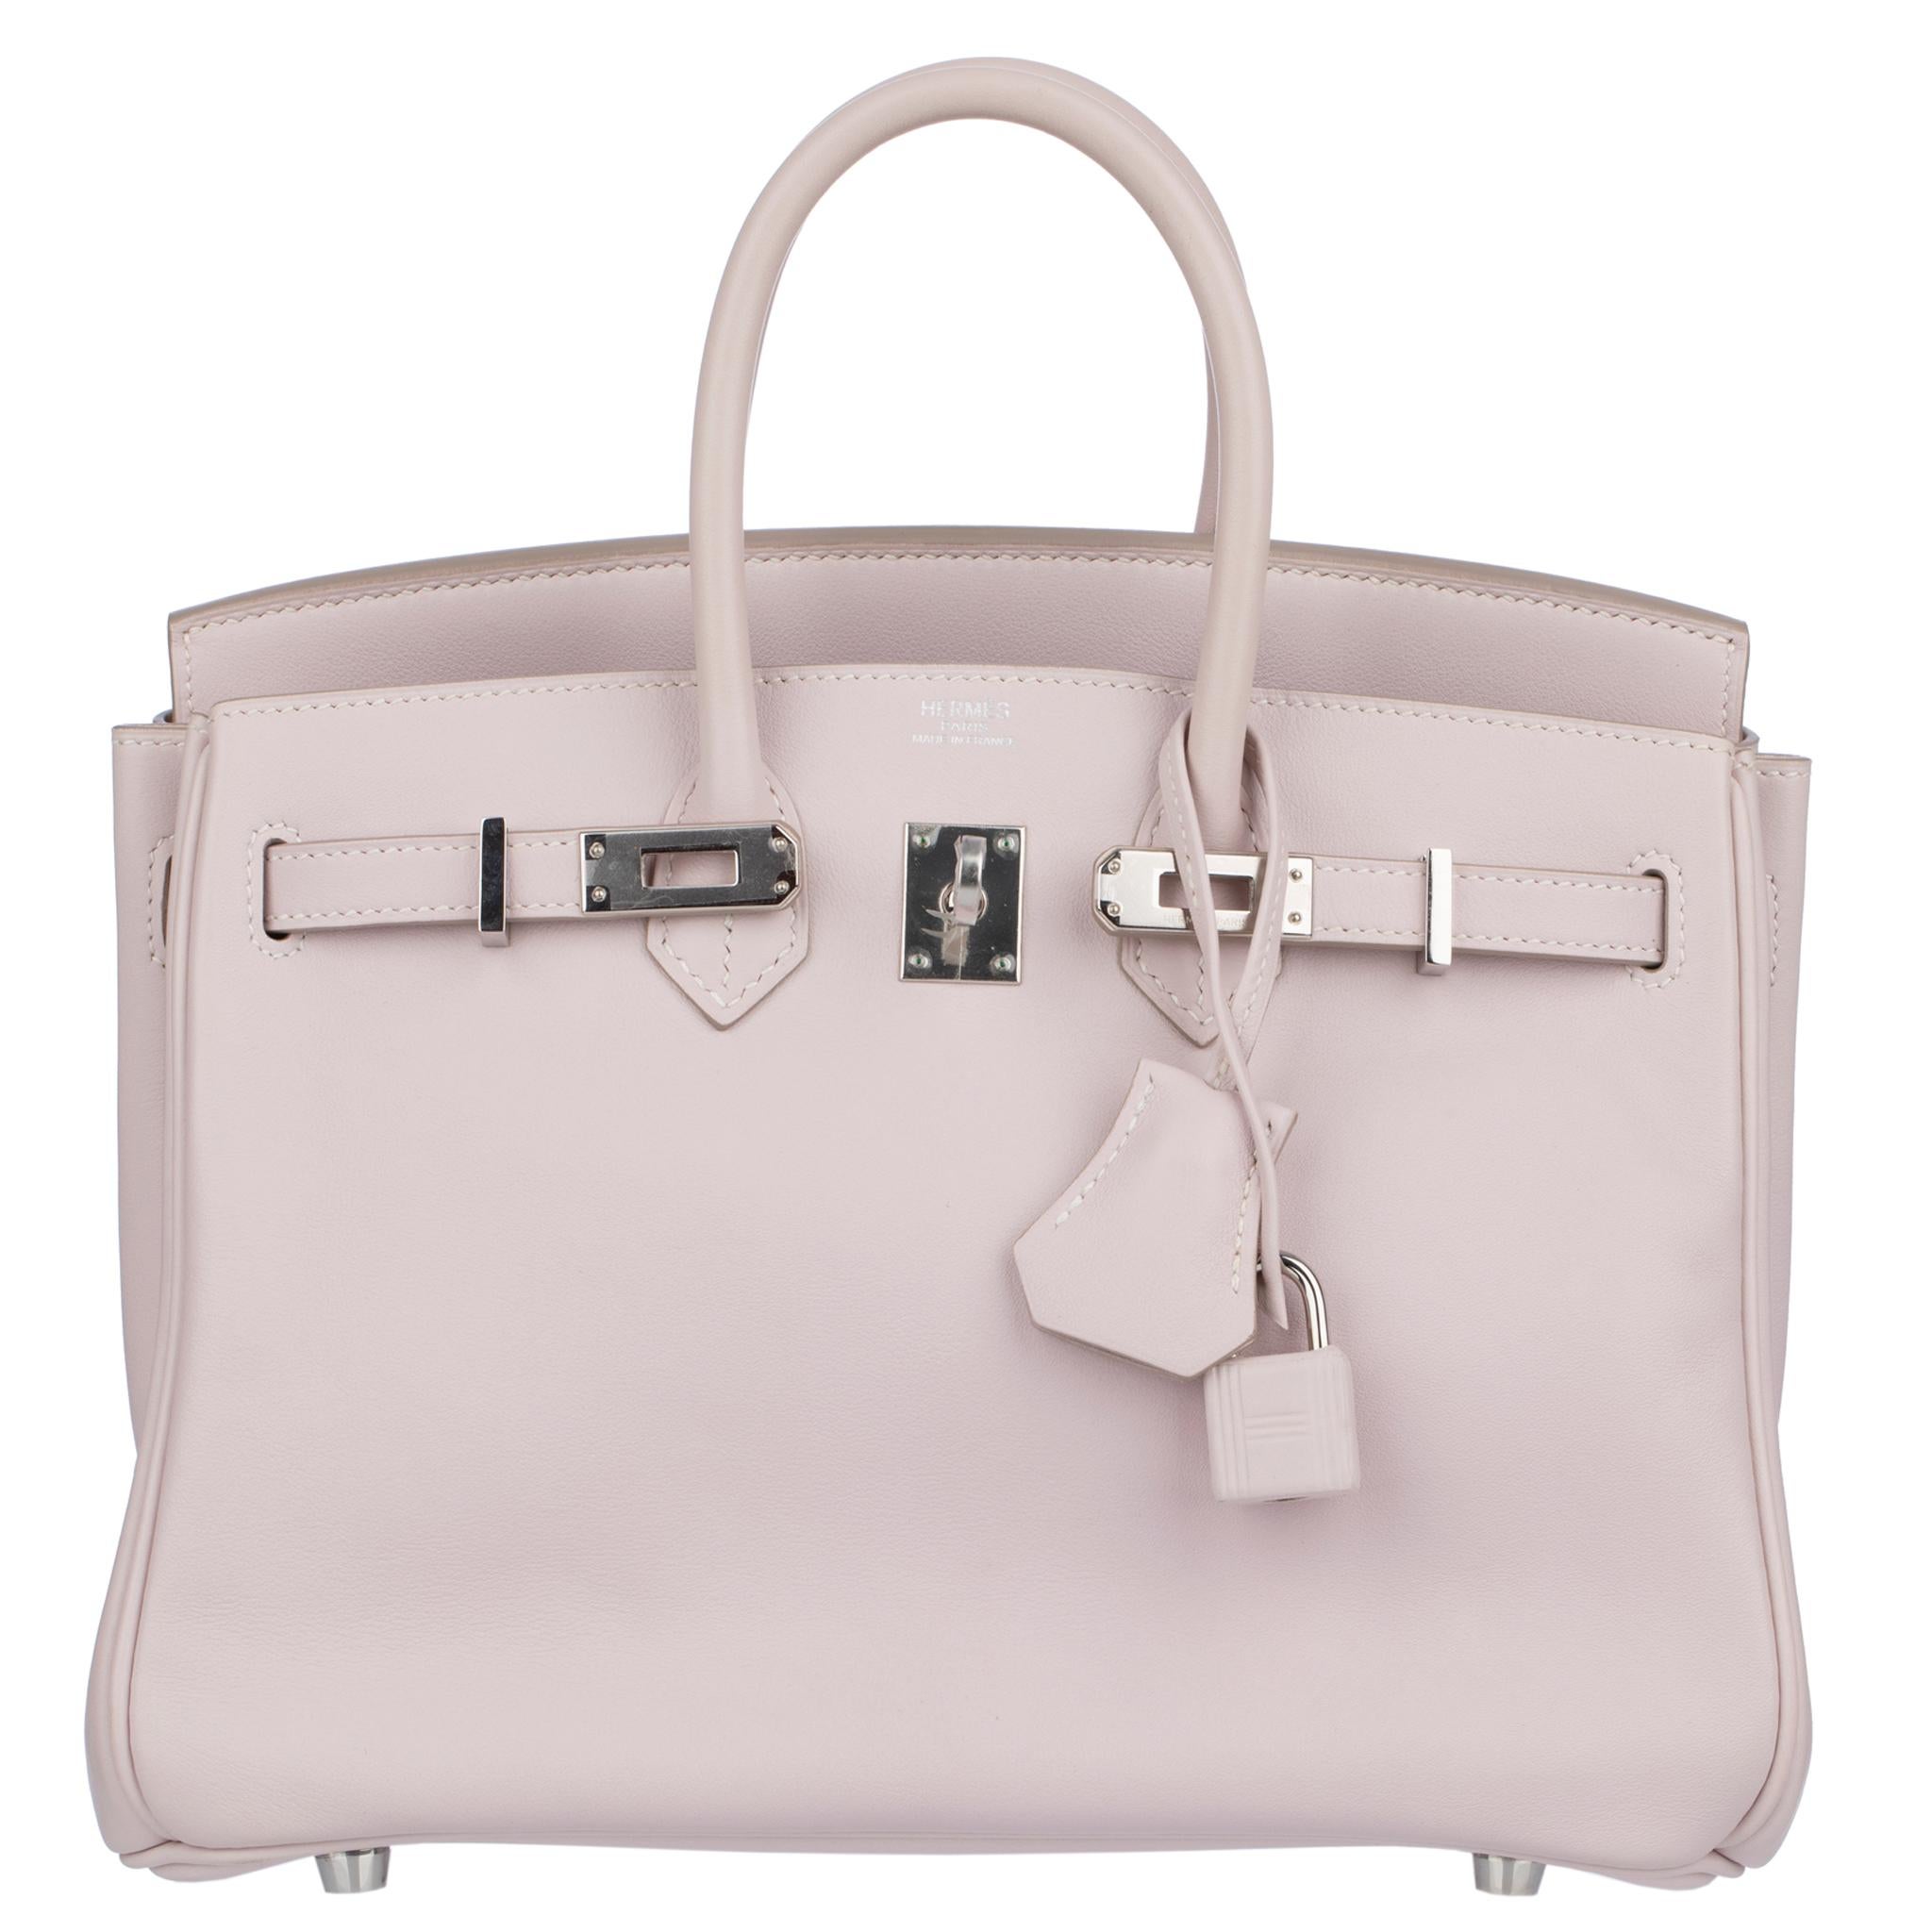 The Hermes Birkin 25cm in Rose Dragee Swift Leather with Palladium Hardware is an embodiment of timeless elegance and grace.

Meticulously crafted by Hermes artisans, this iconic bag features the exquisite Rose Dragee Swift Leather, known for its